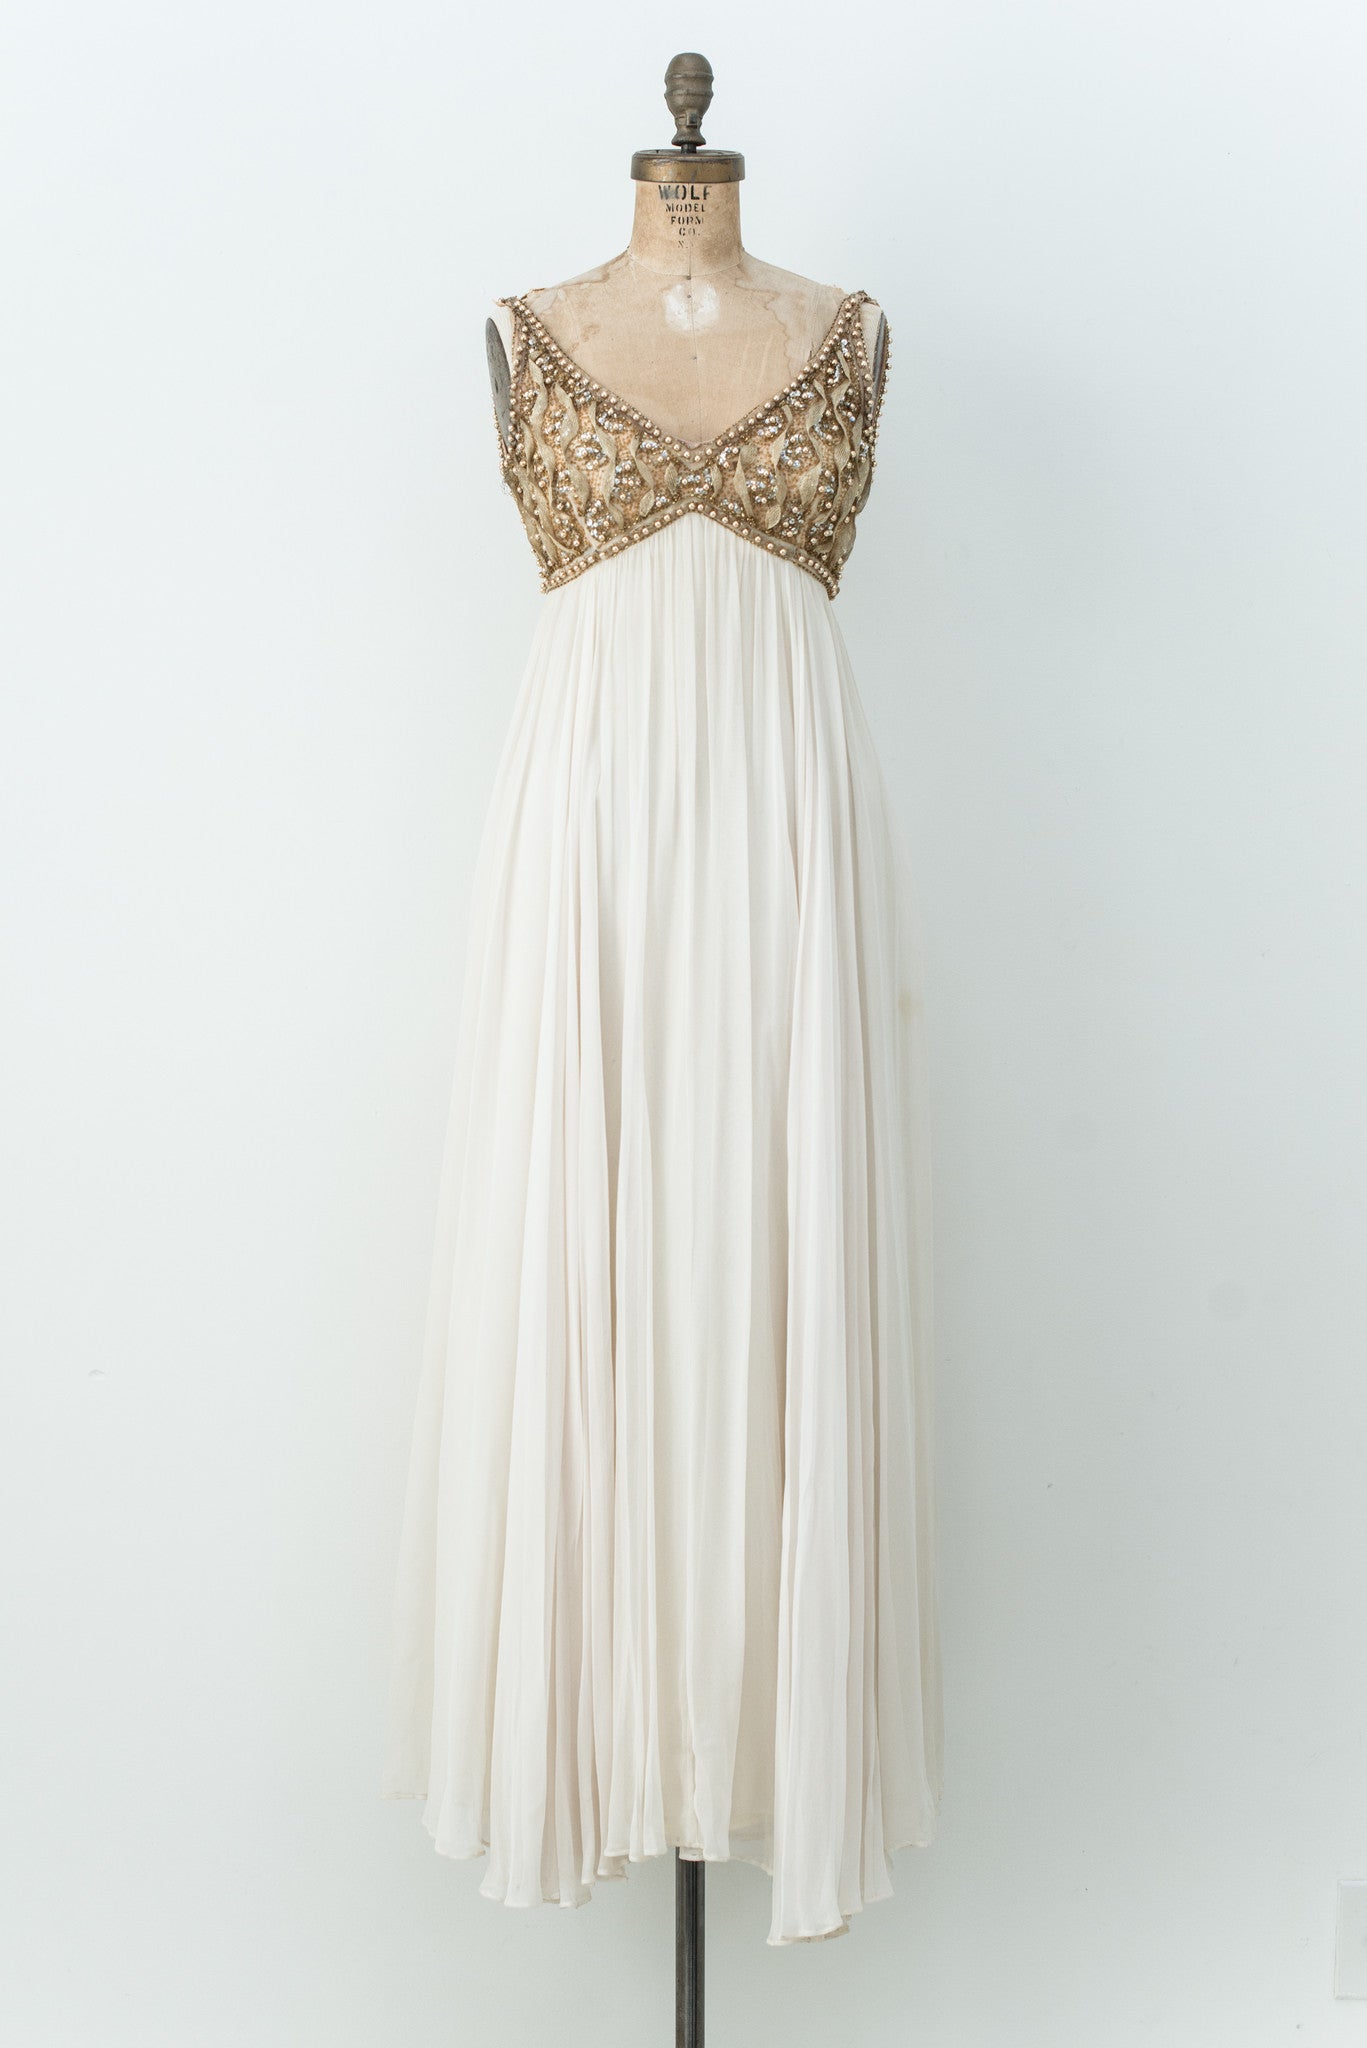 1960s Empire Chiffon and Sequined Gown - XS